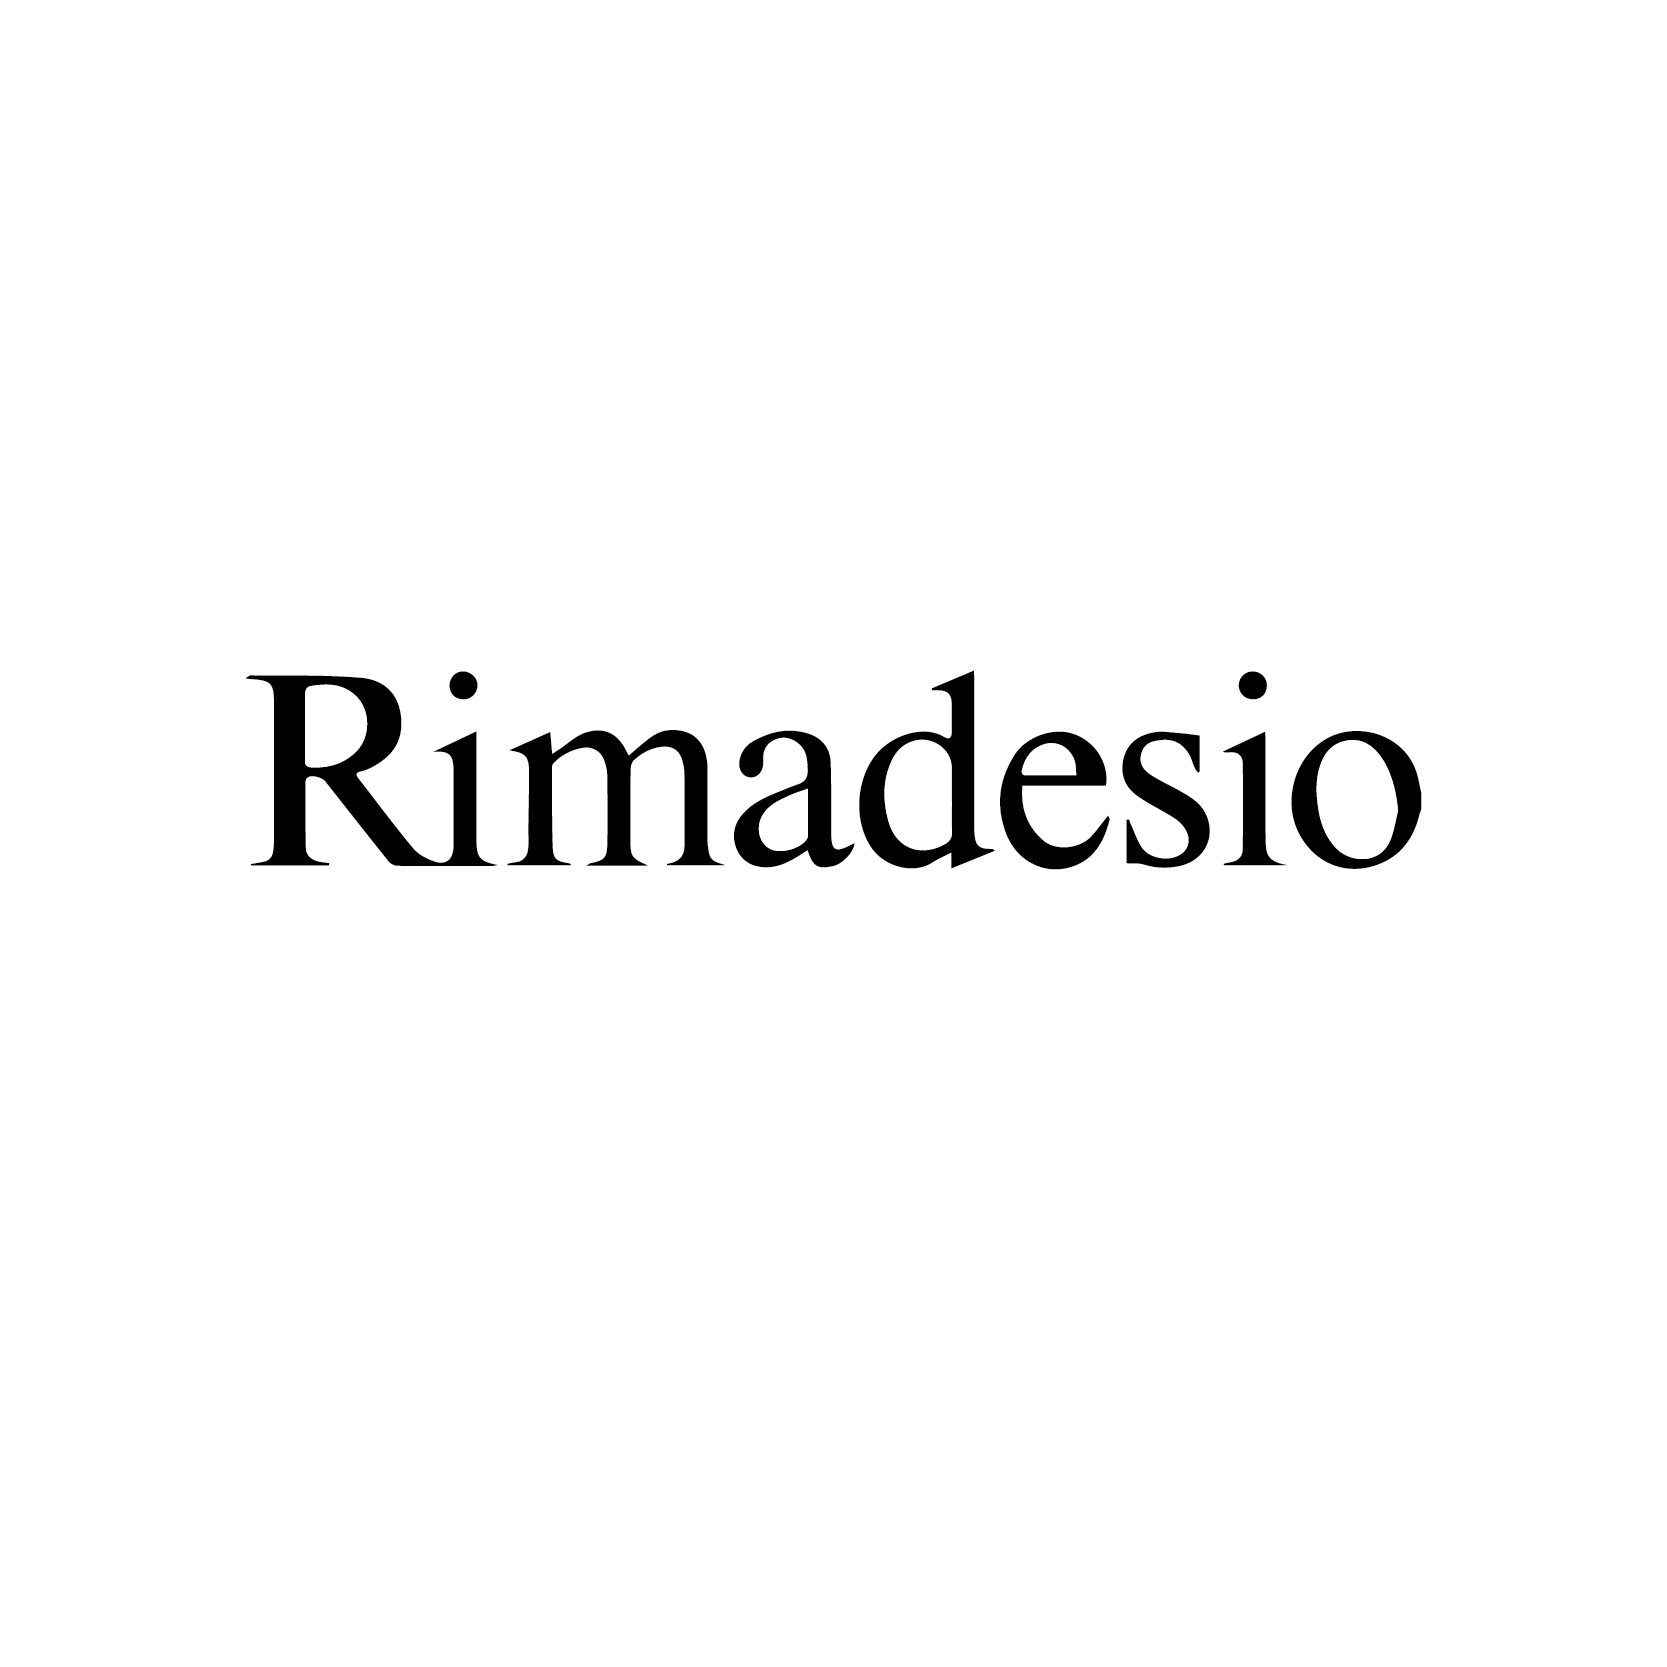 Rimadesio.png